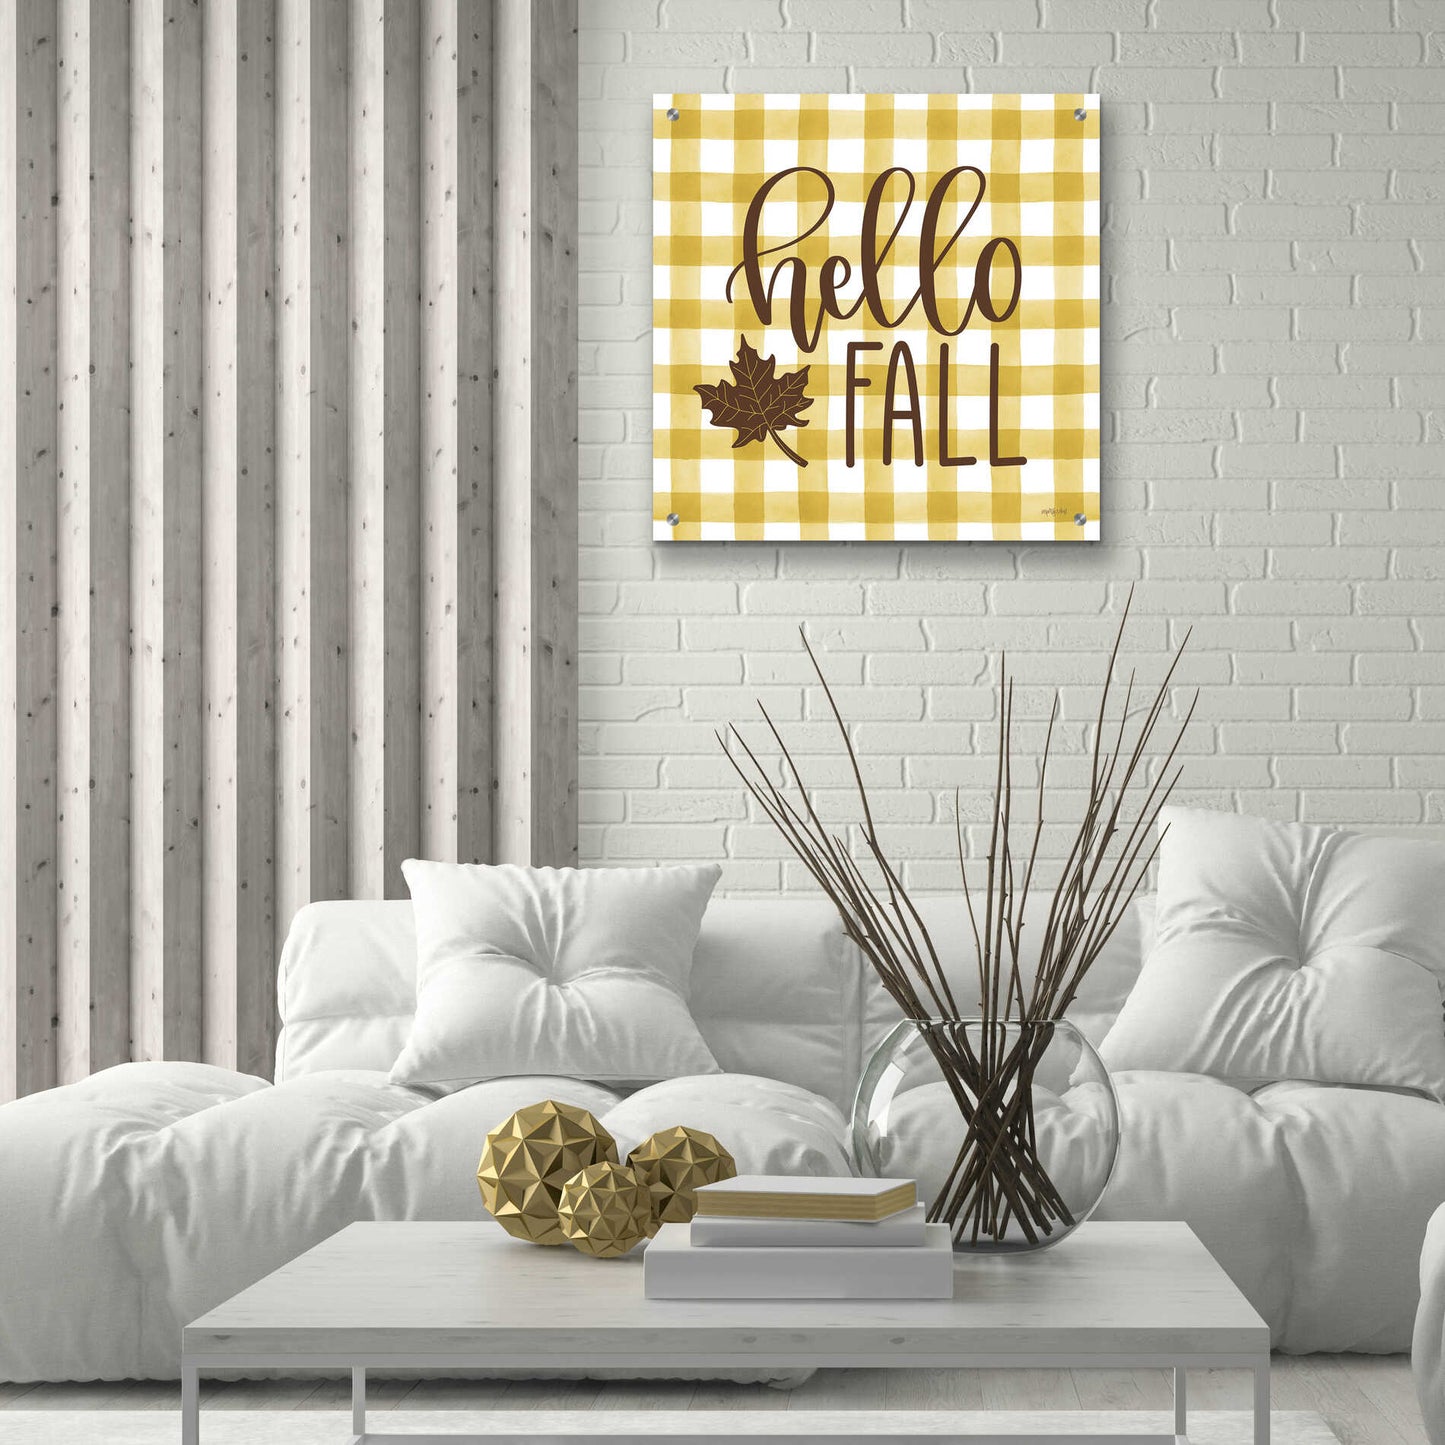 Epic Art 'Hello Fall' by Imperfect Dust, Acrylic Glass Wall Art,24x24